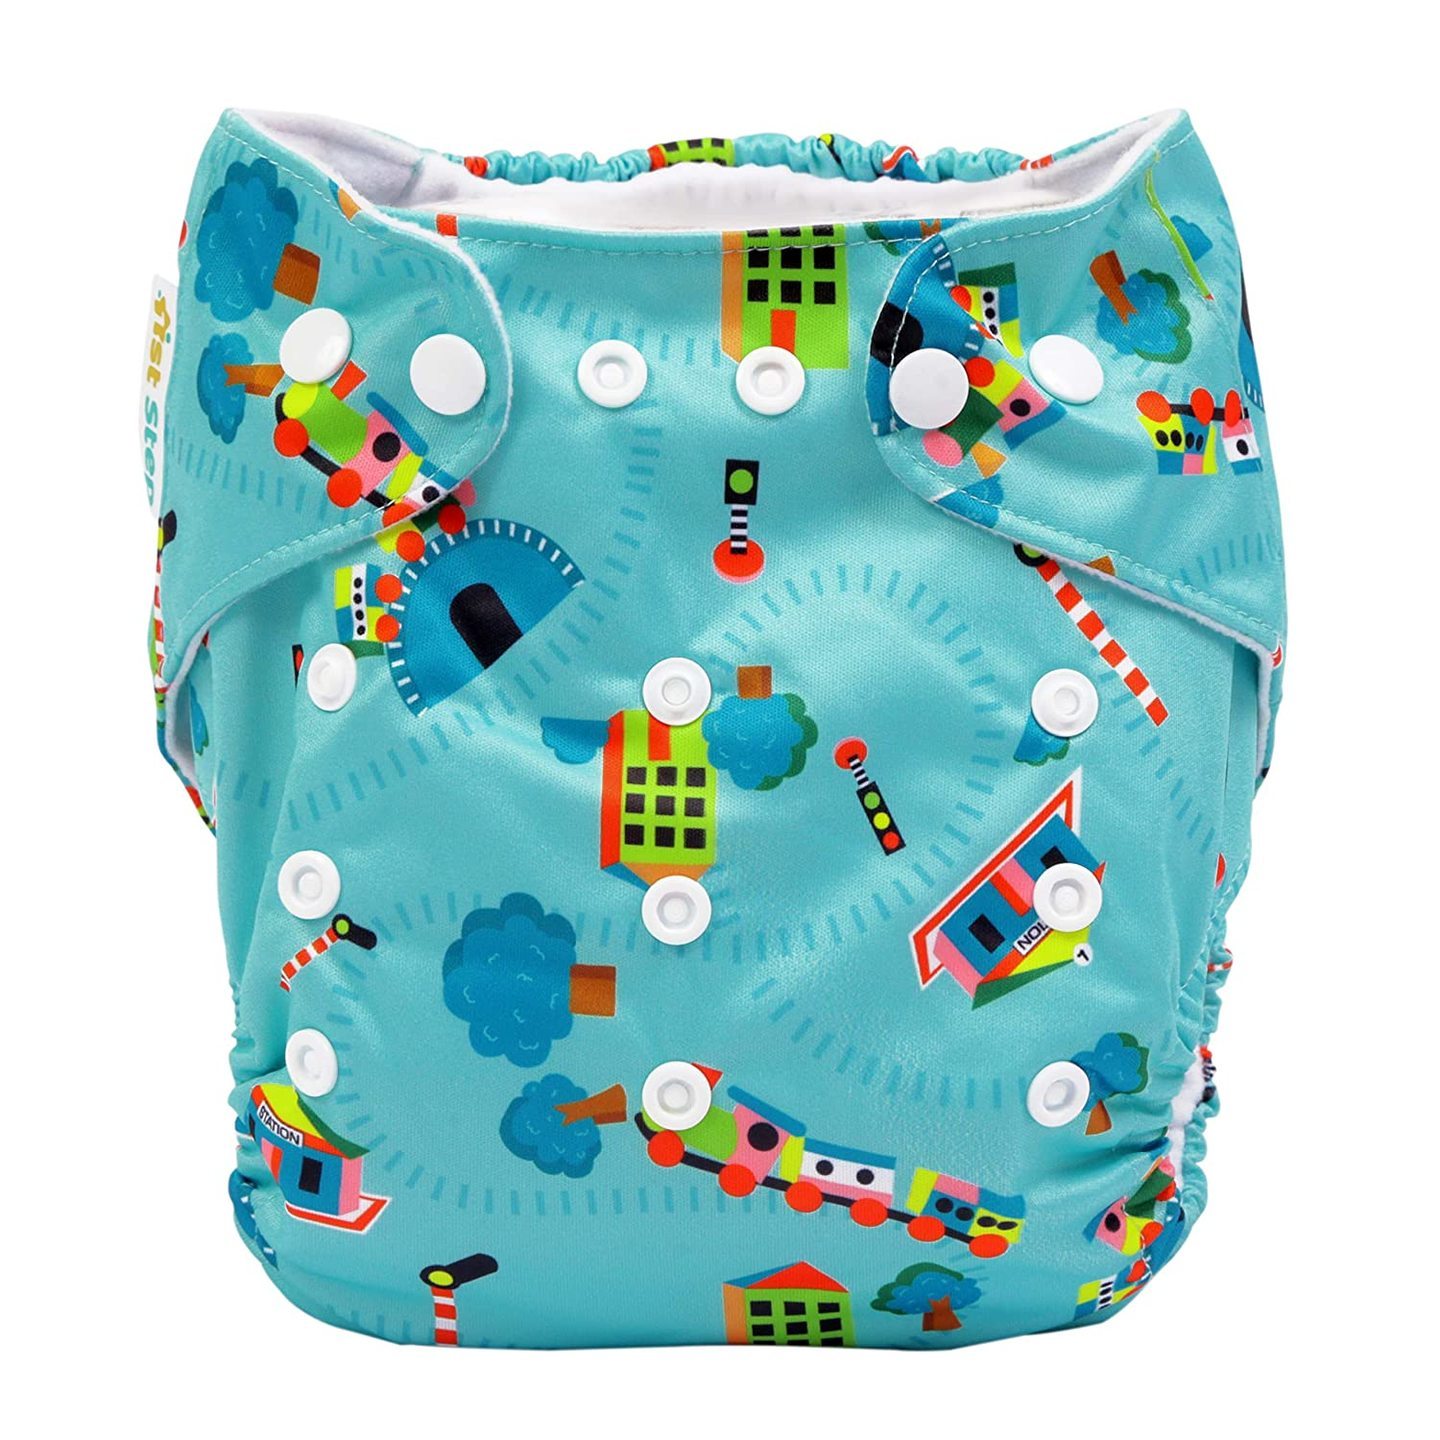 Cloth Diaper: Free size, Adjustable, Washable and Reusable Diaper with Diaper Liner (Green)